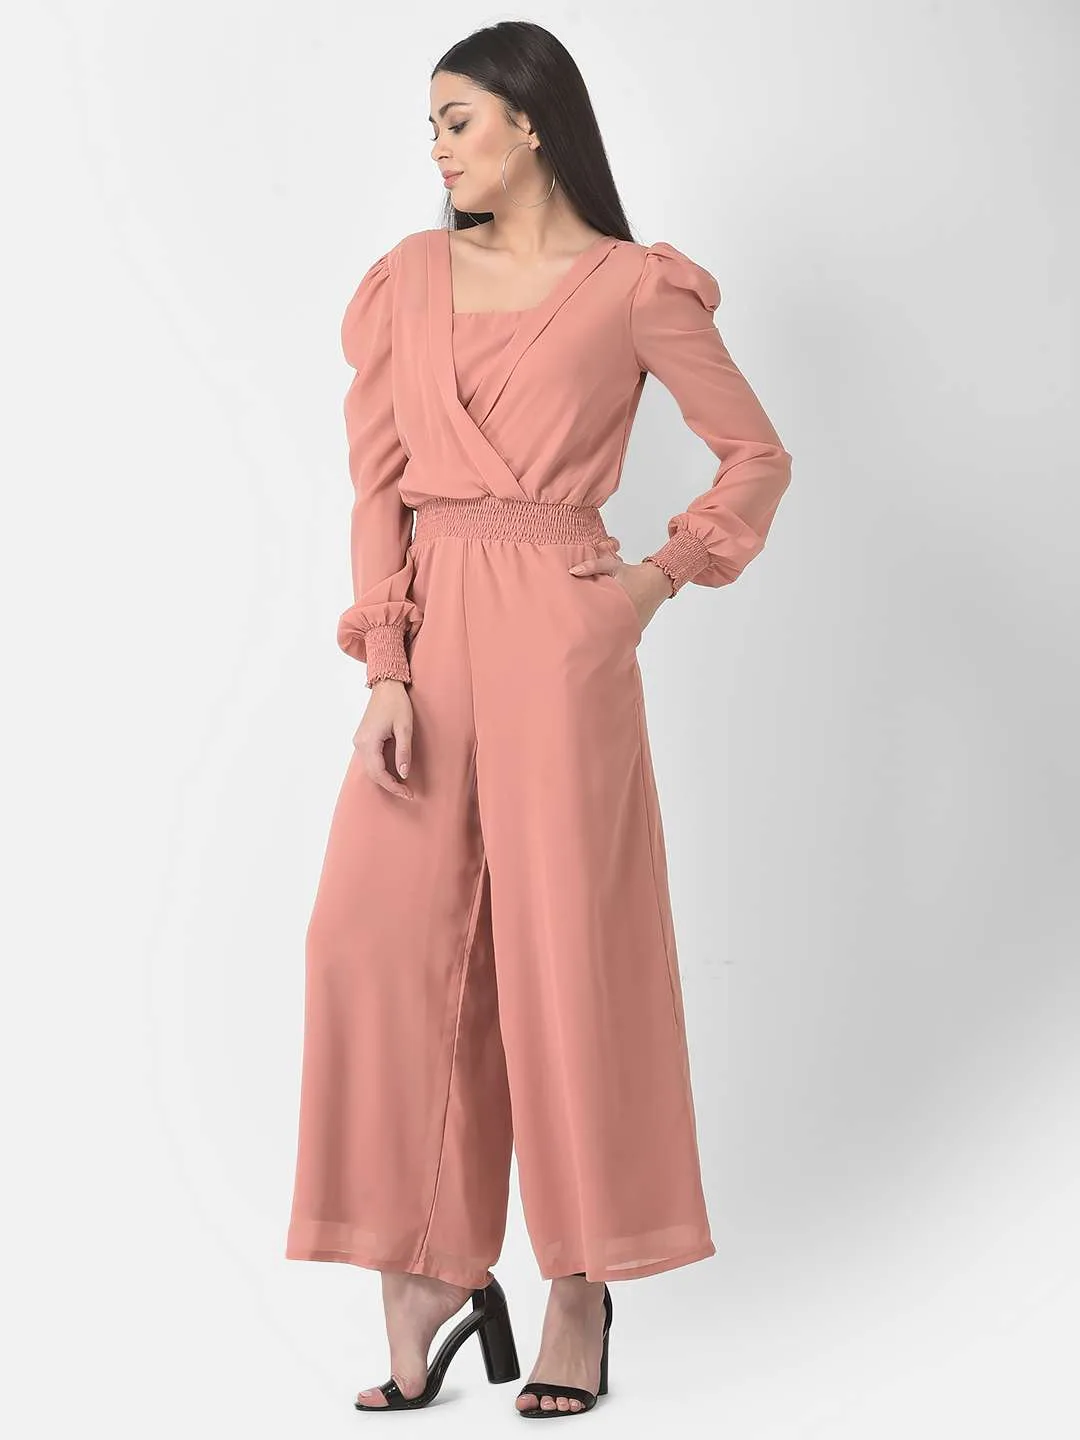 PSPeaches Jumpsuits : Buy PSPeaches Peach Color Jumpsuit Online | Nykaa  Fashion